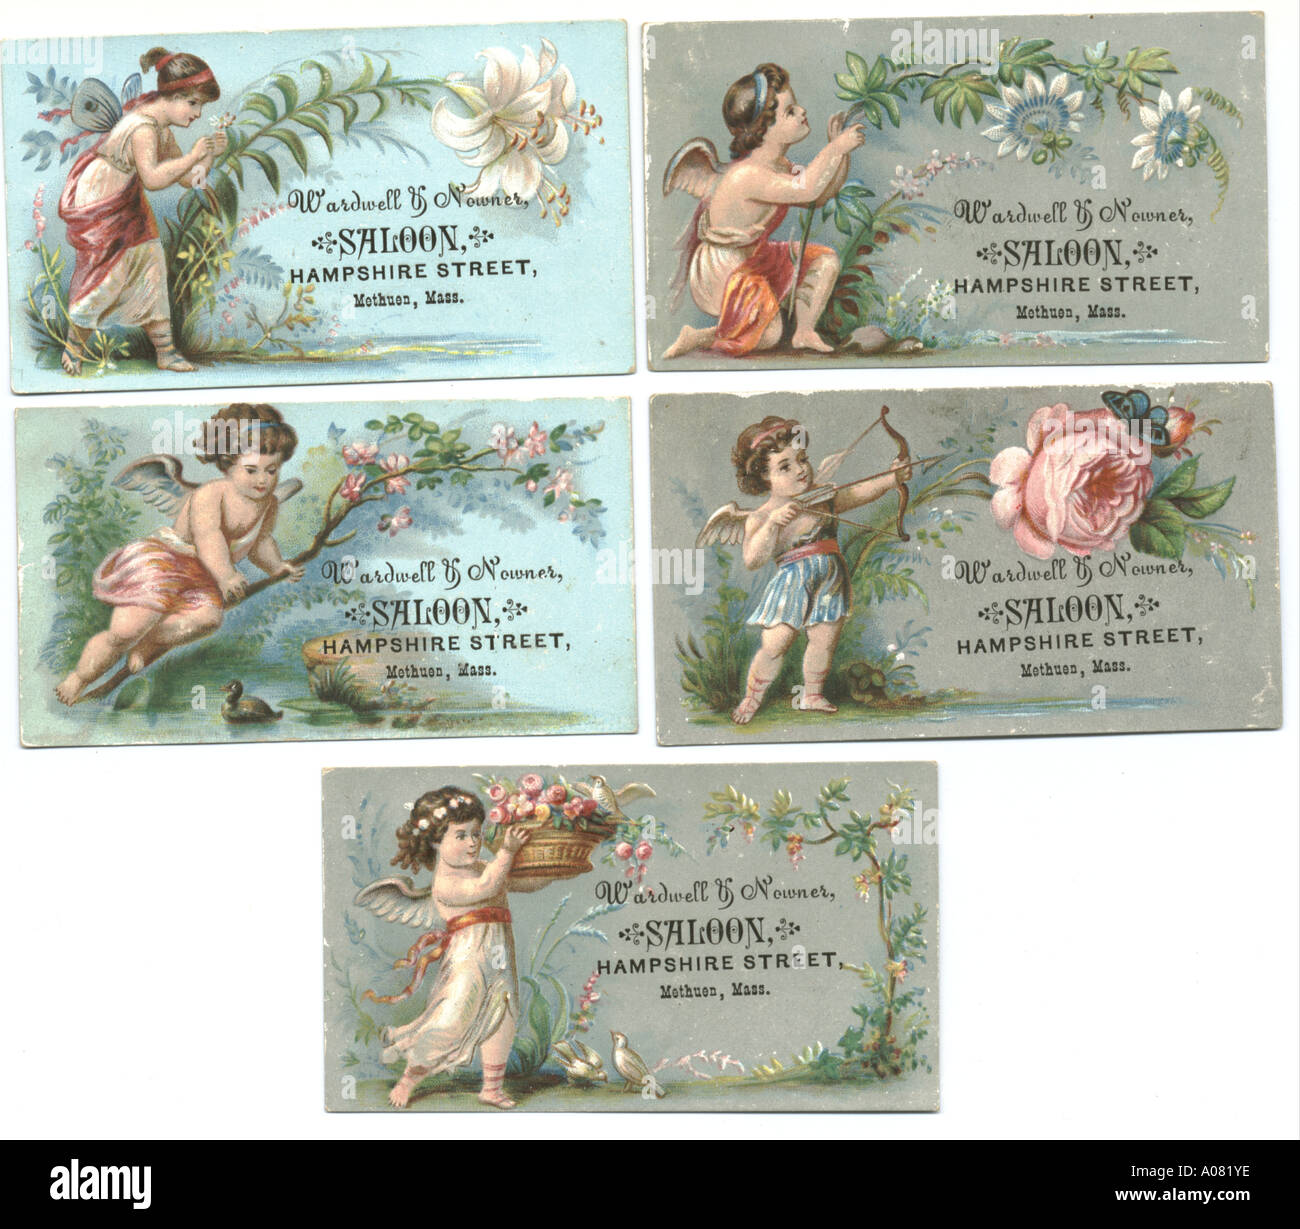 Trade cards published by Methuen, Mass., USA, circa 1875 Stock Photo